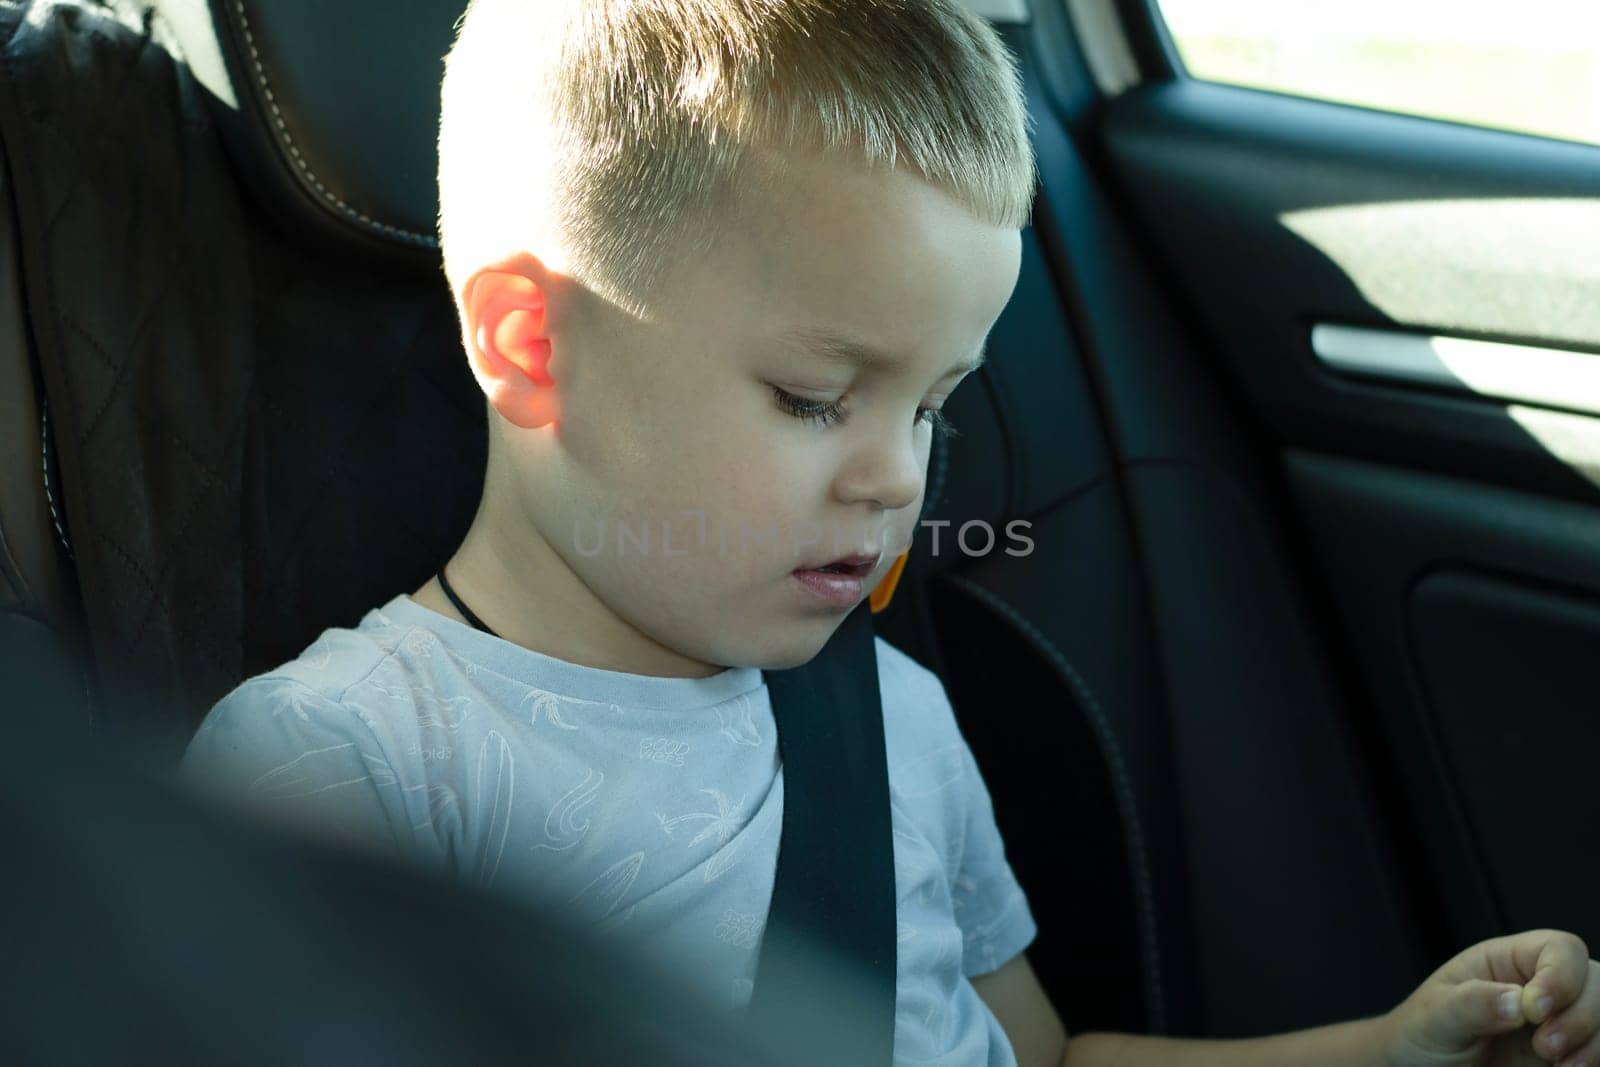 Security concept. A 4-year-old boy is riding in a car with a seat belt fastened in a child seat in the back seat. He travels with his family and watches cartoons on his iPad. Soft focus. Horizontal.